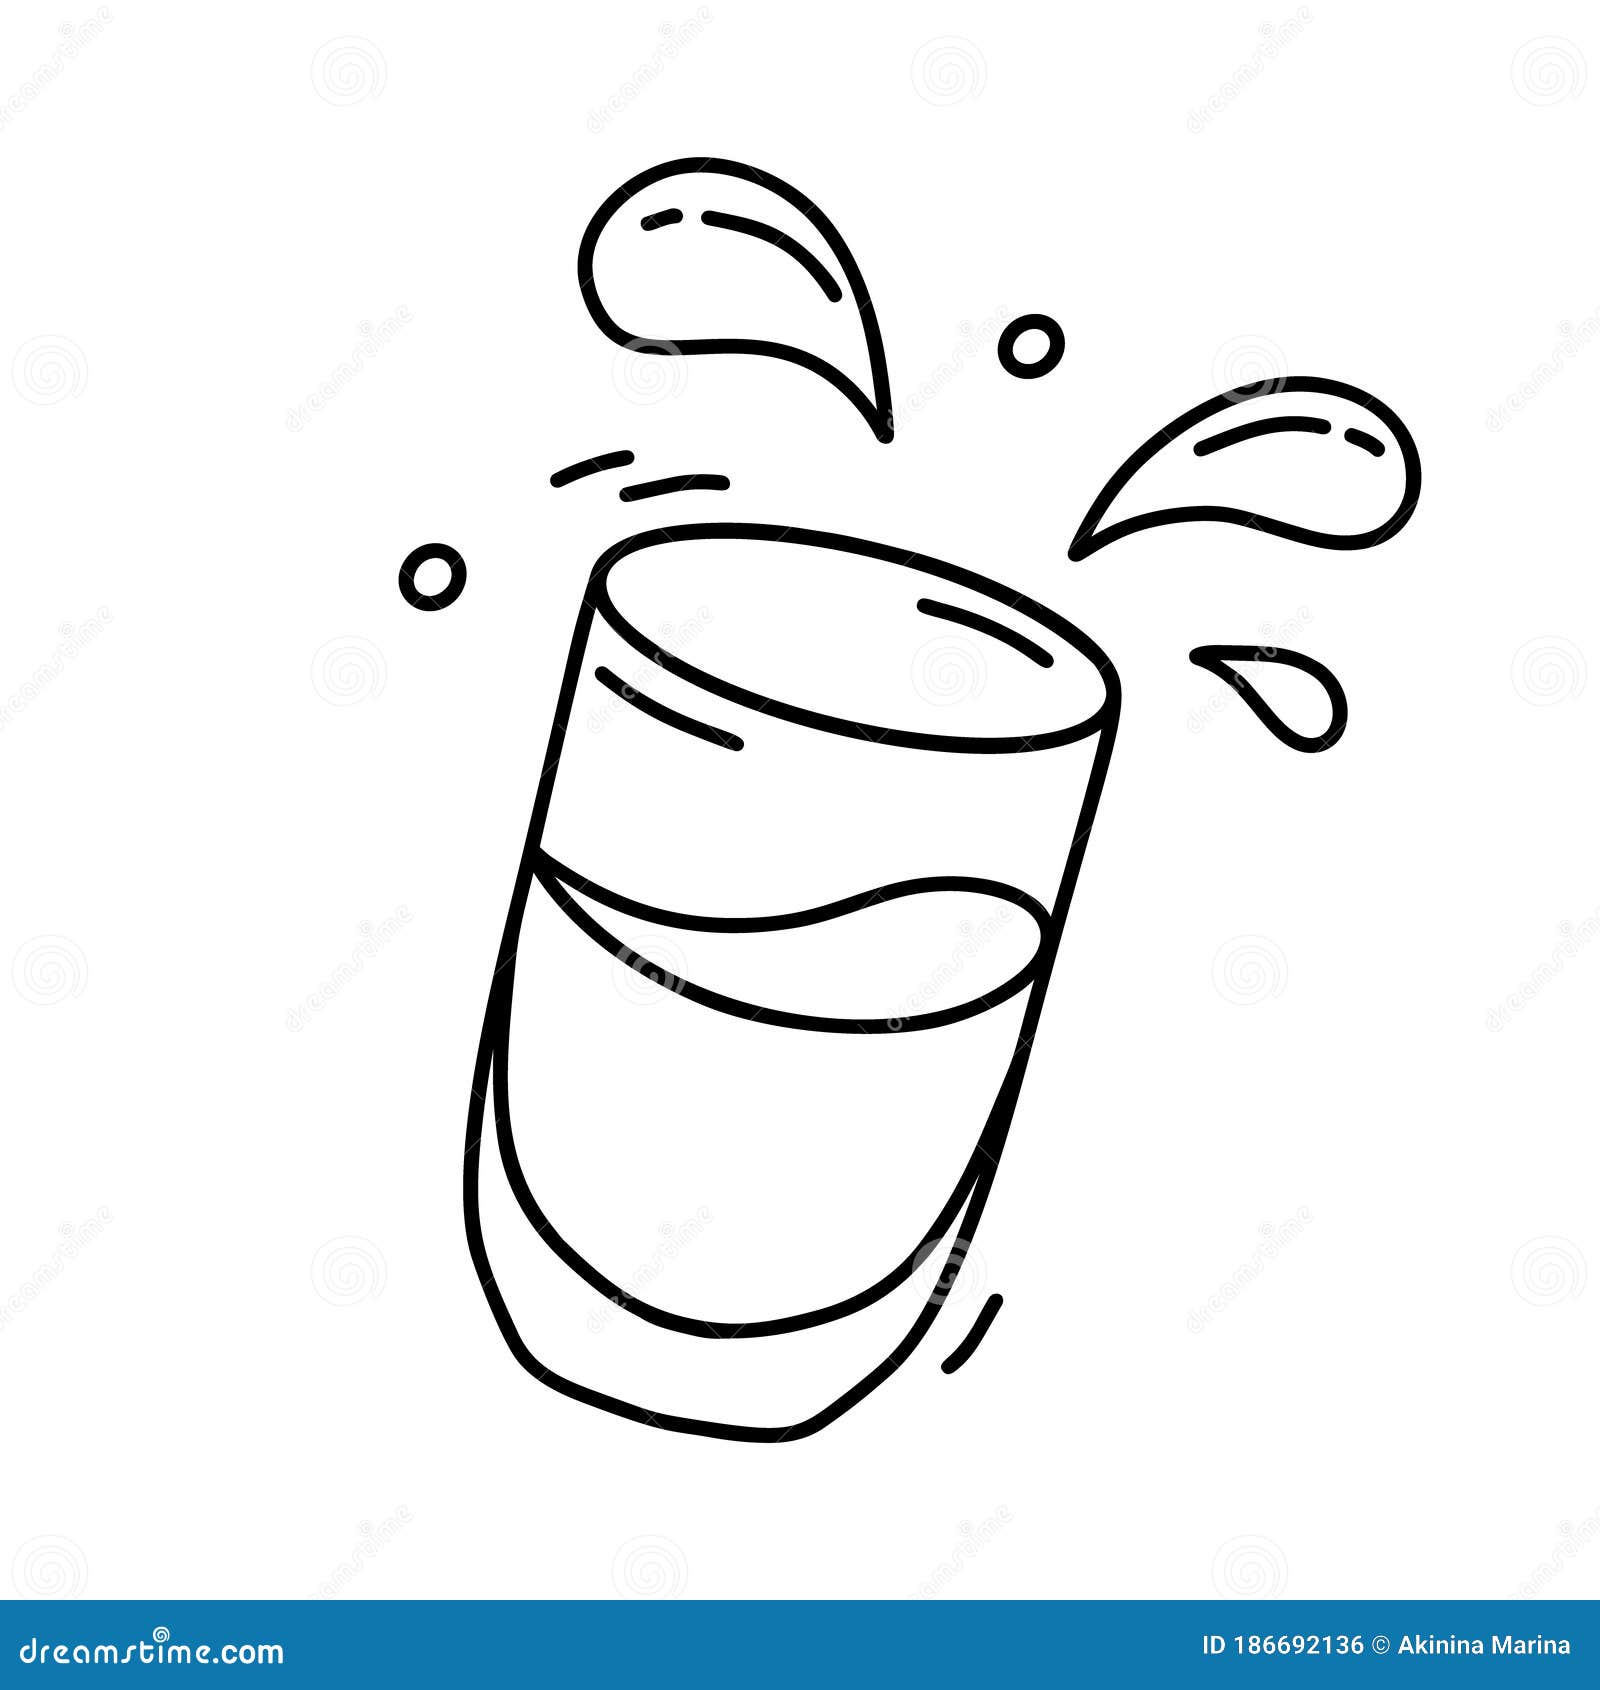 14,285 Cup Water Sketch Royalty-Free Photos and Stock Images | Shutterstock